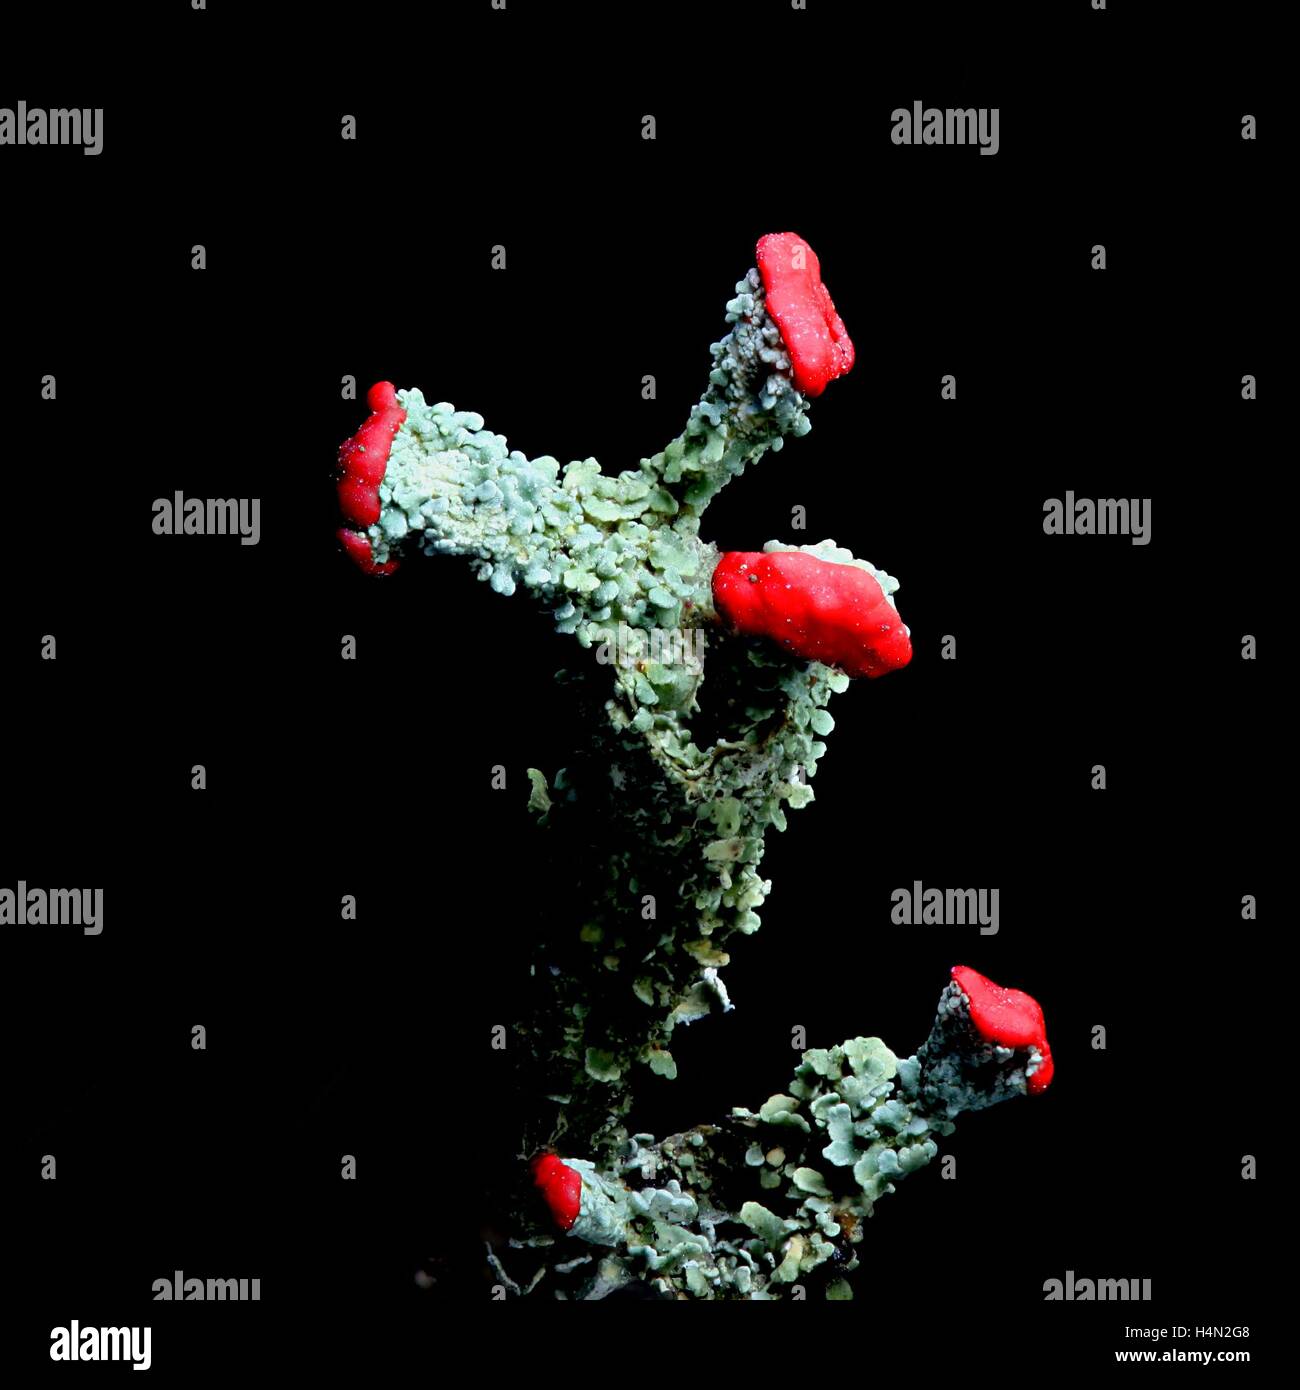 Lichen with red podetia on black background Stock Photo